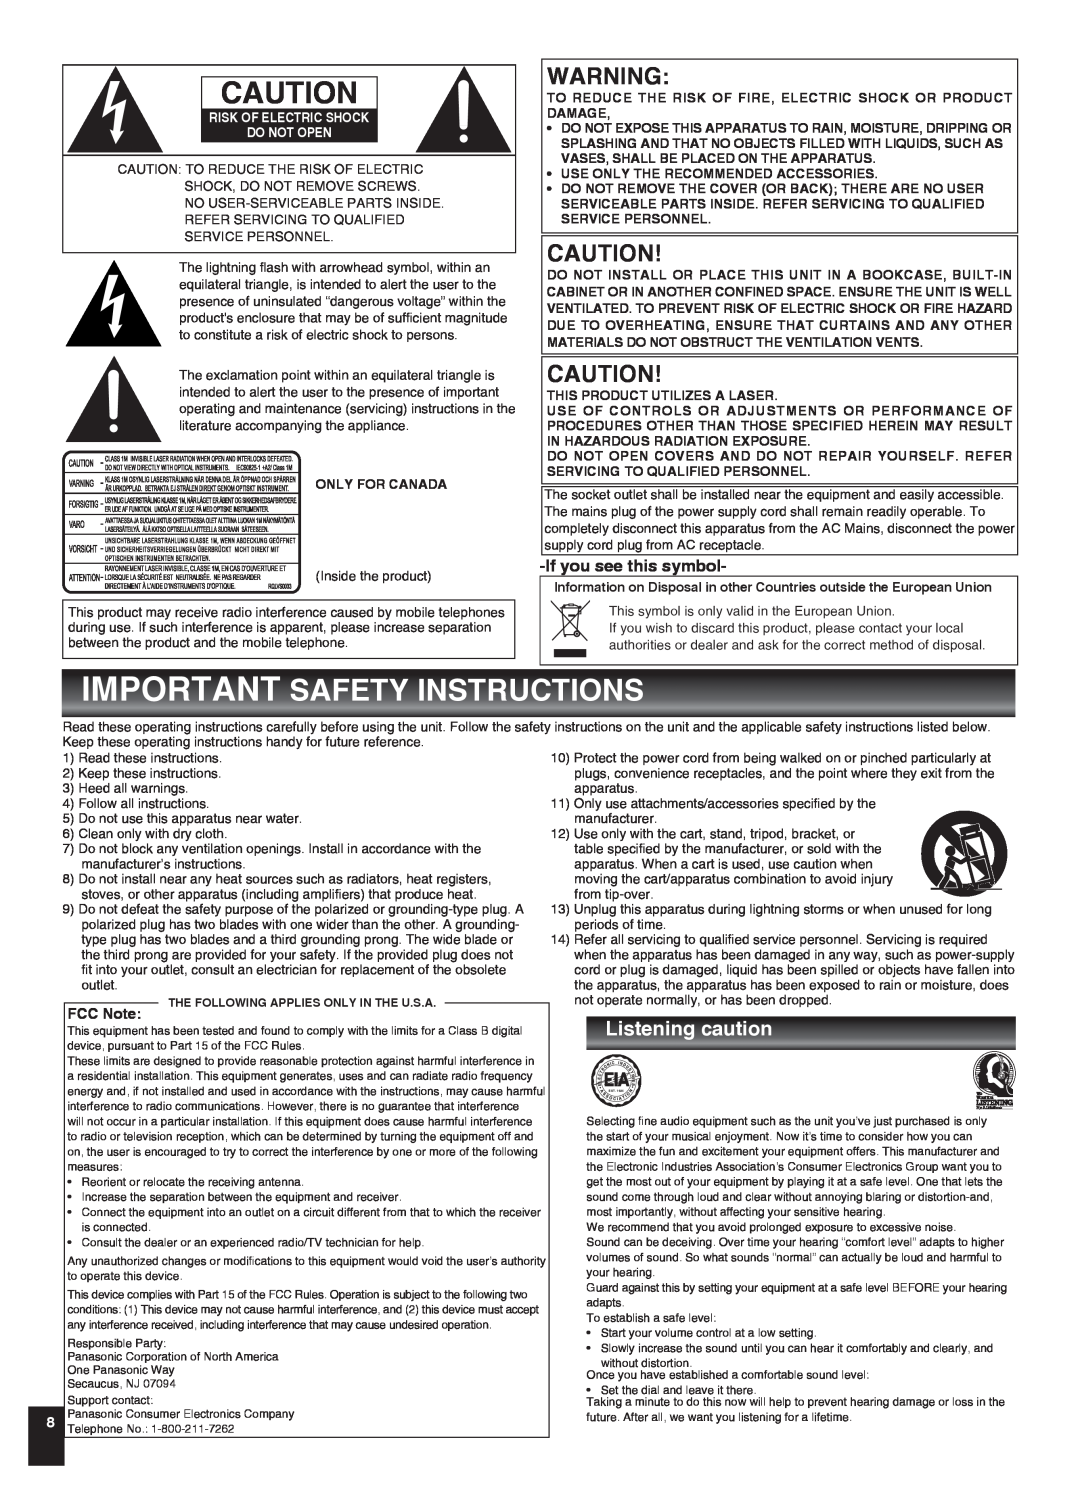 Panasonic SCEN35, SC-EN33 manual Listening caution, Ifyou see this symbol, FCC Note, Risk Of Electric Shock Do Not Open 